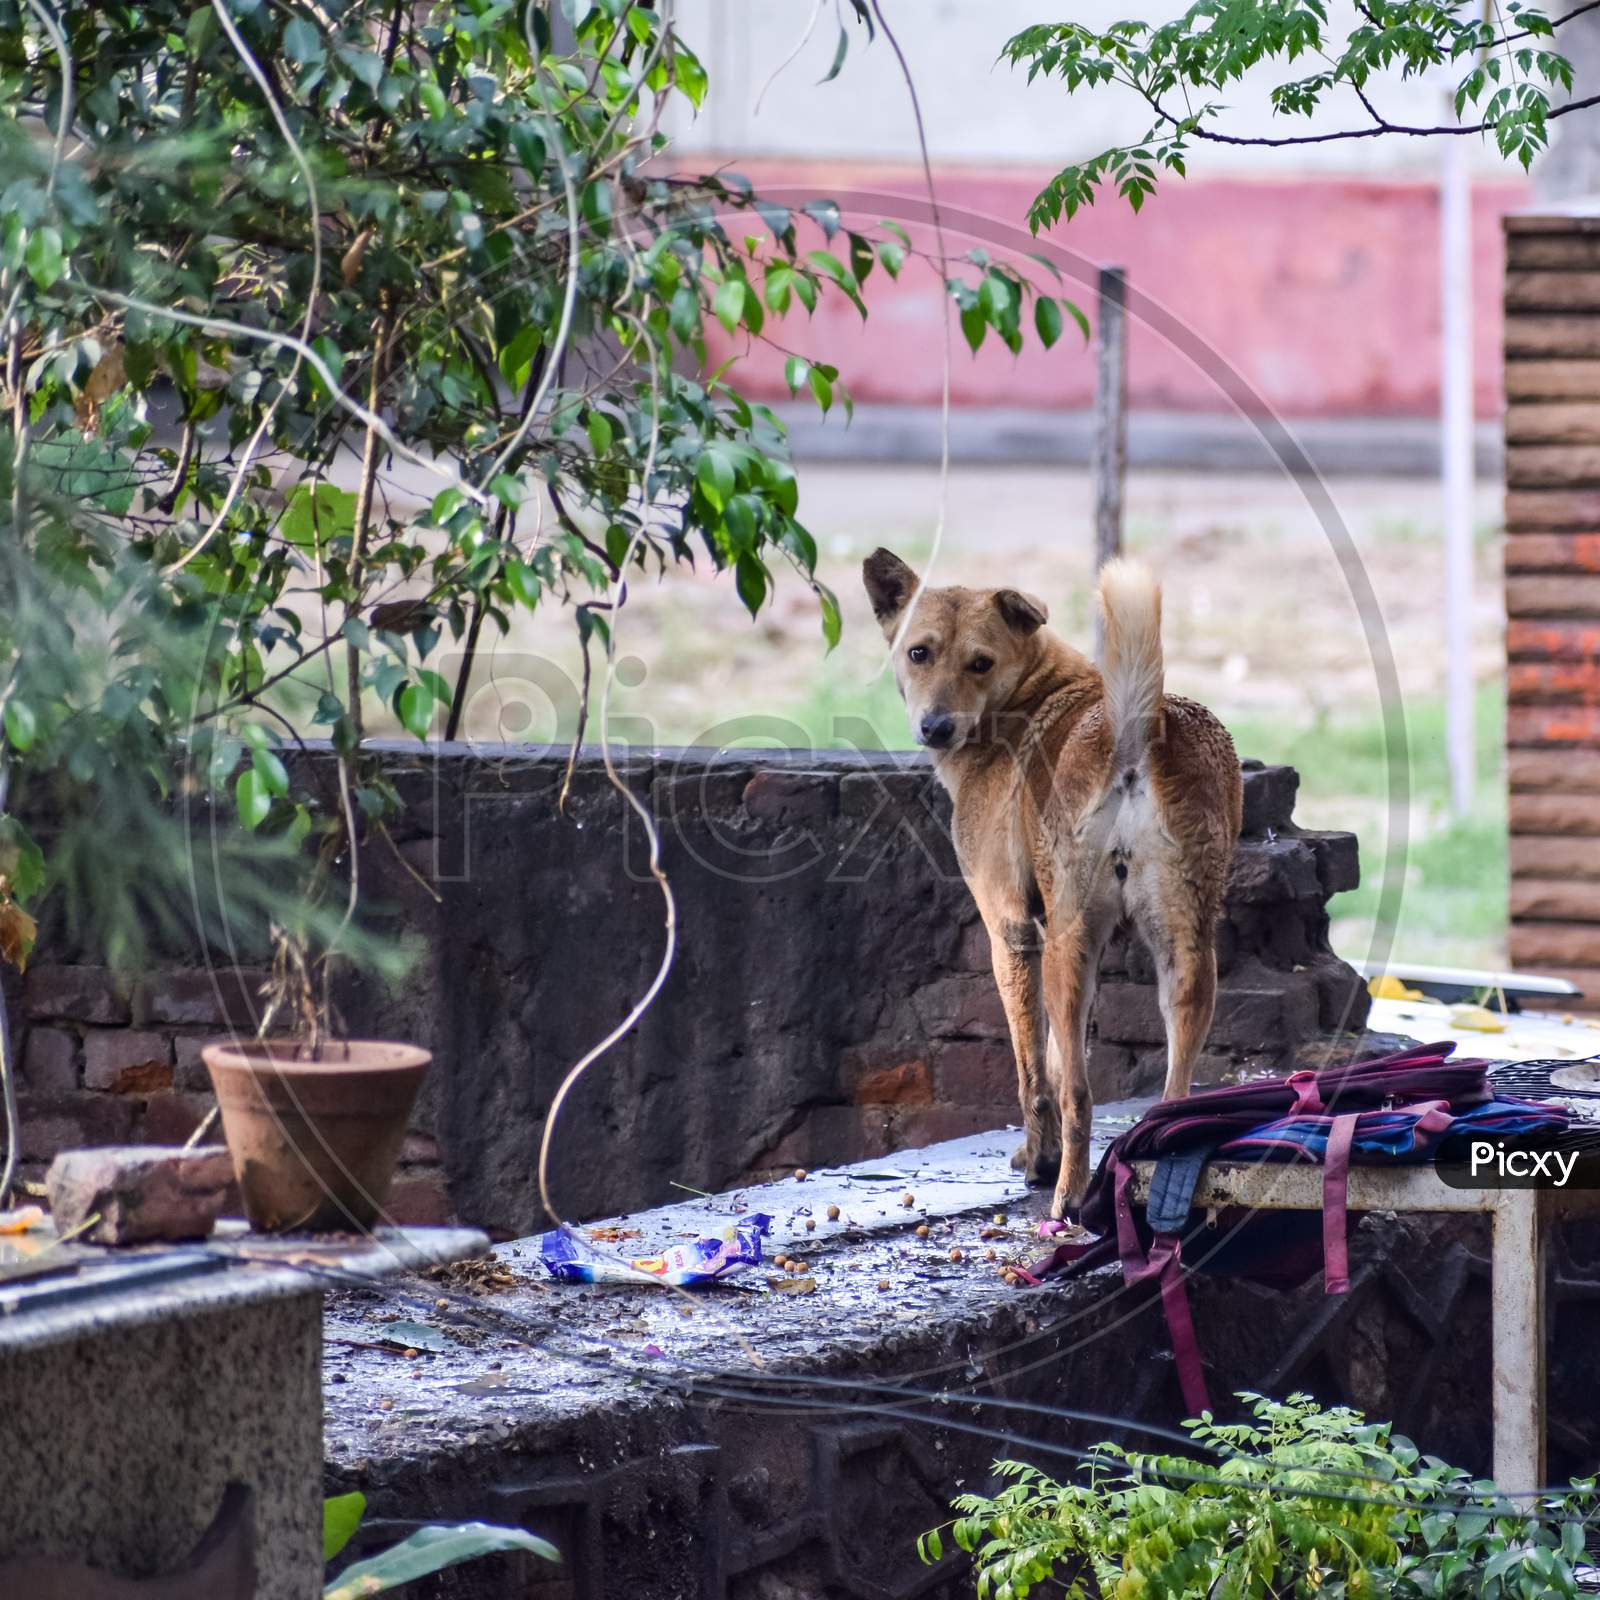 Street Dog Searching For Some Amazing Food, Dog In Old Delhi Area Chandni Chowk In New Delhi, India, Delhi Street Photography